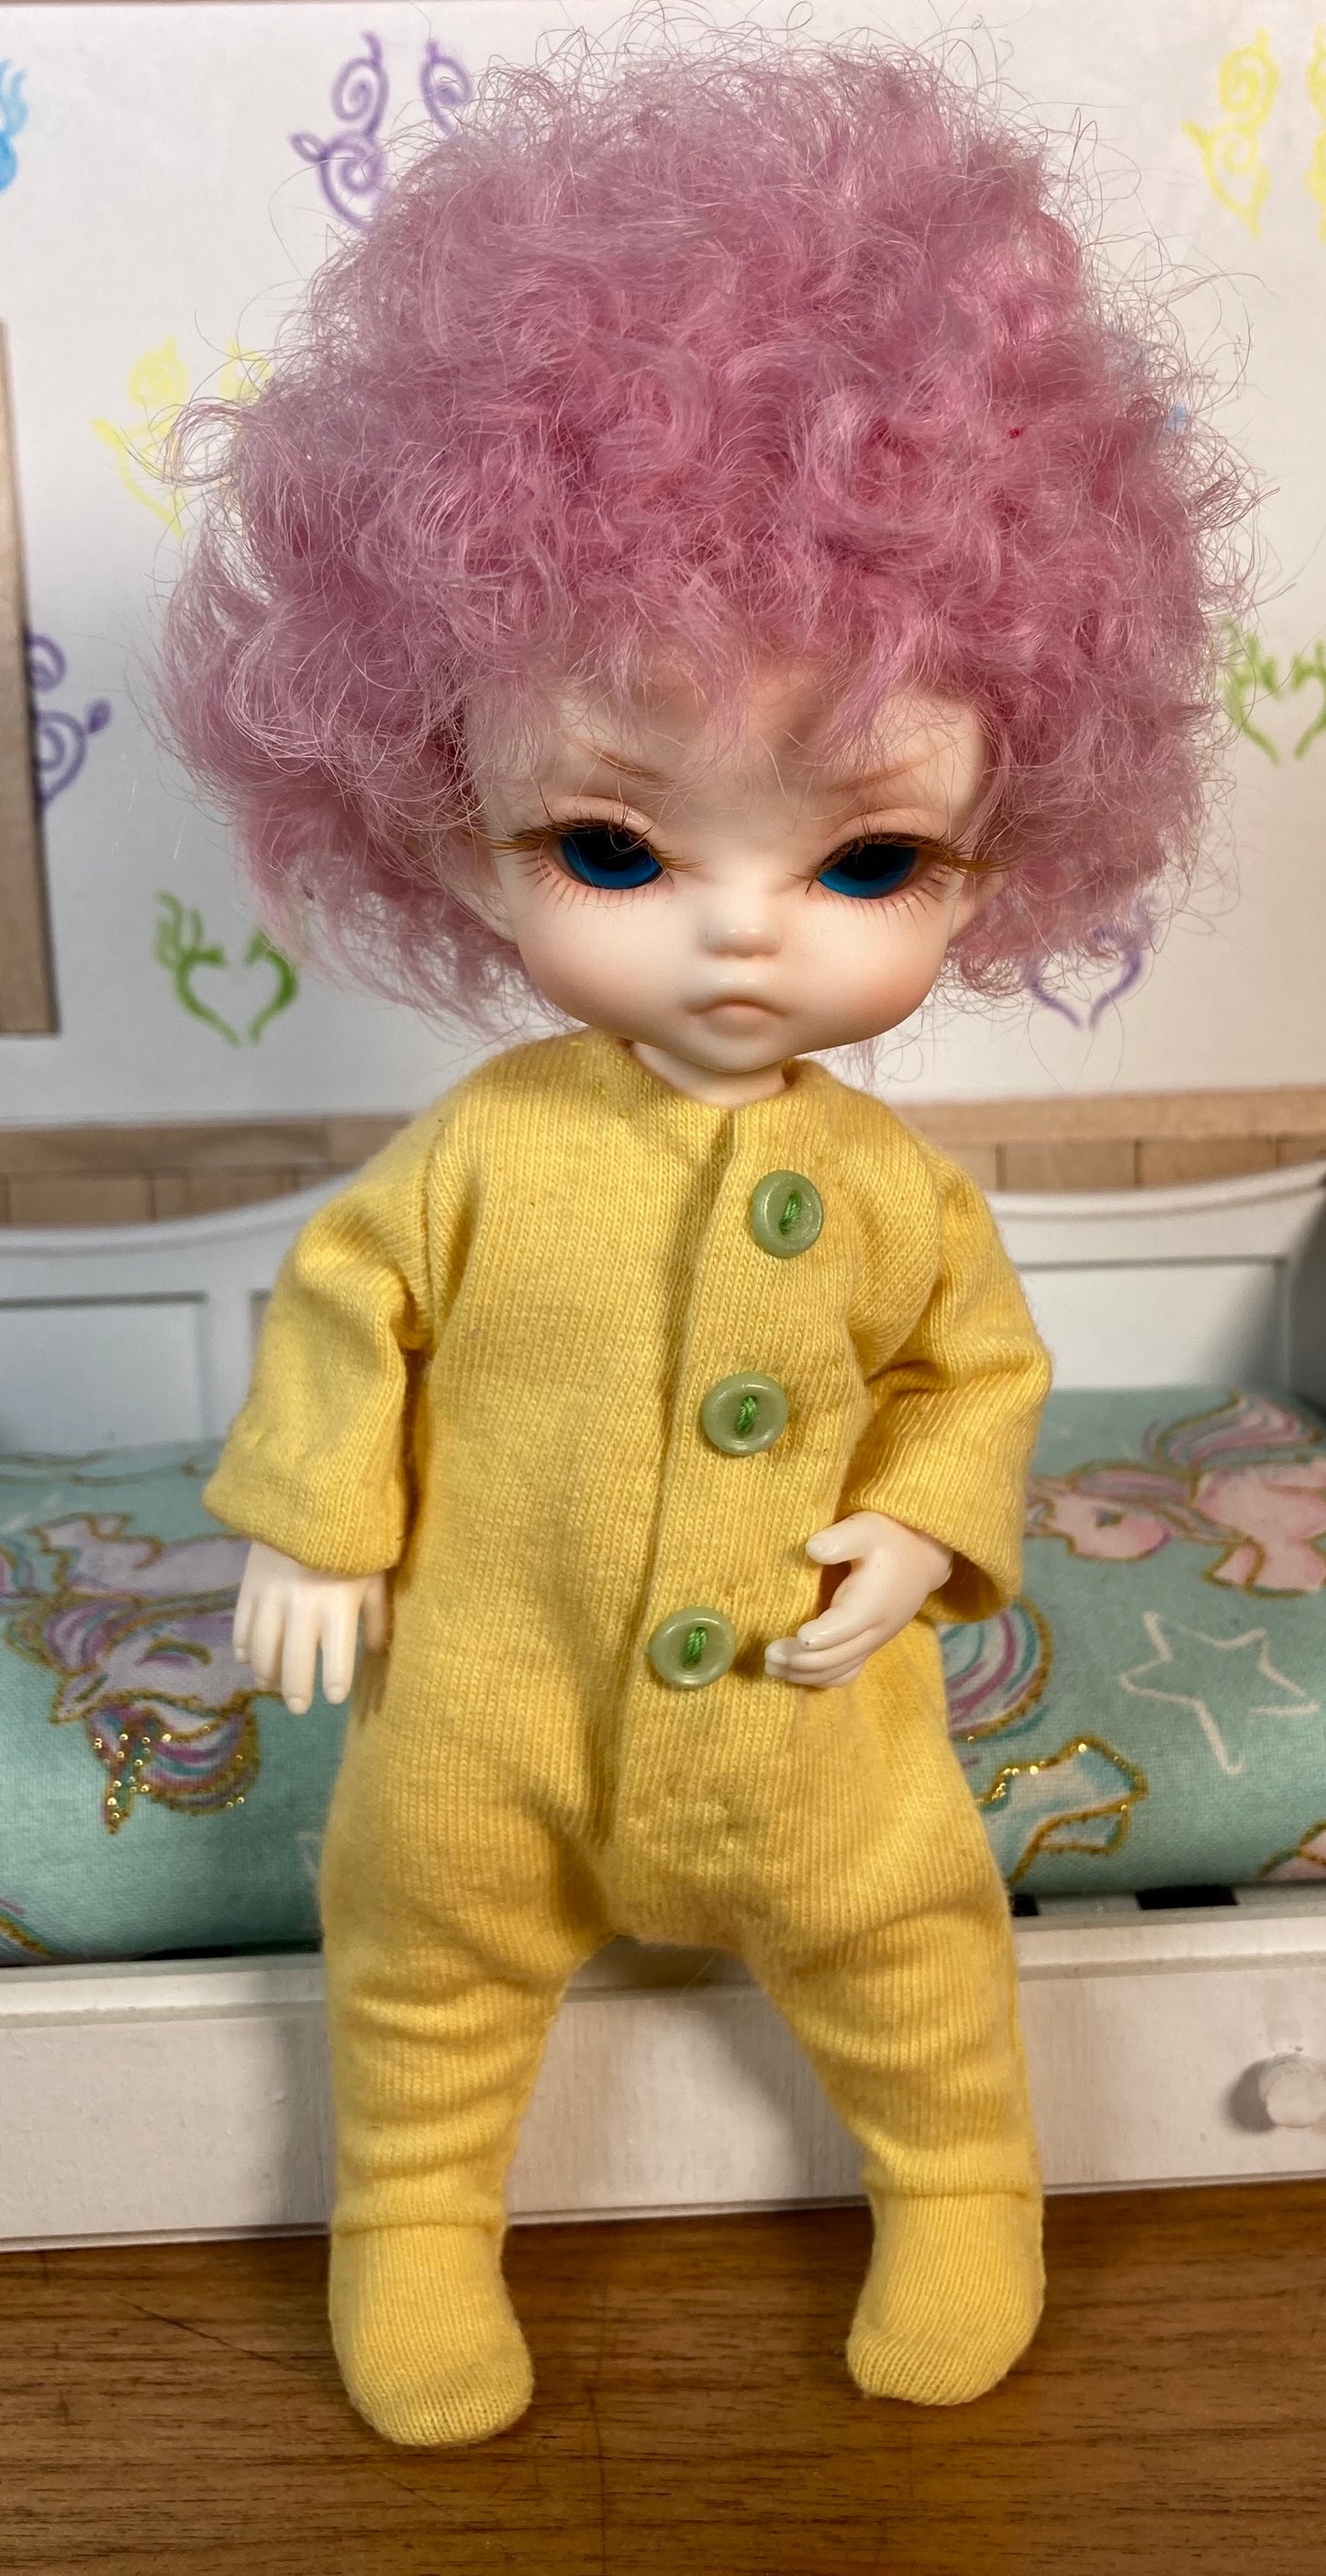 1:8 Scale Footed Pajamas